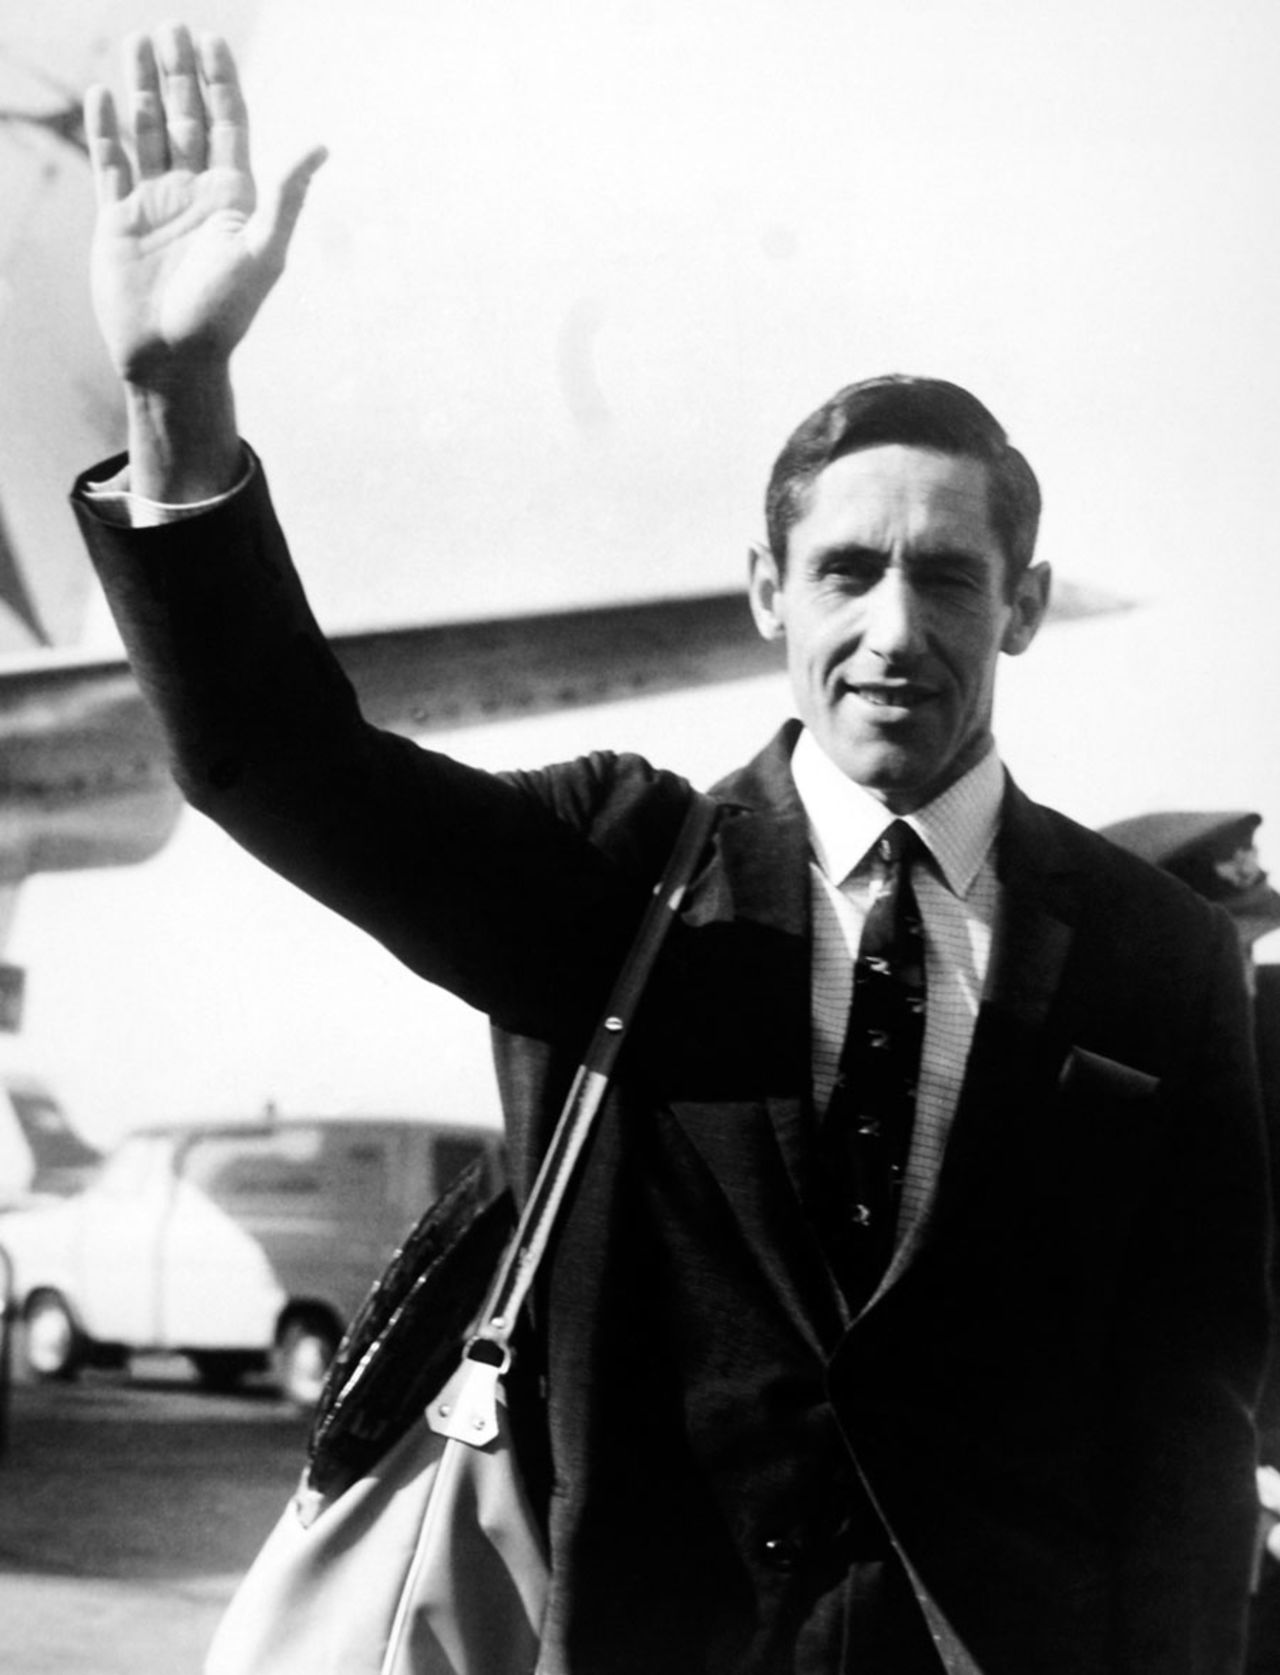 New Zealand captain Graham Dowling waves after landing in London, June 10, 1969